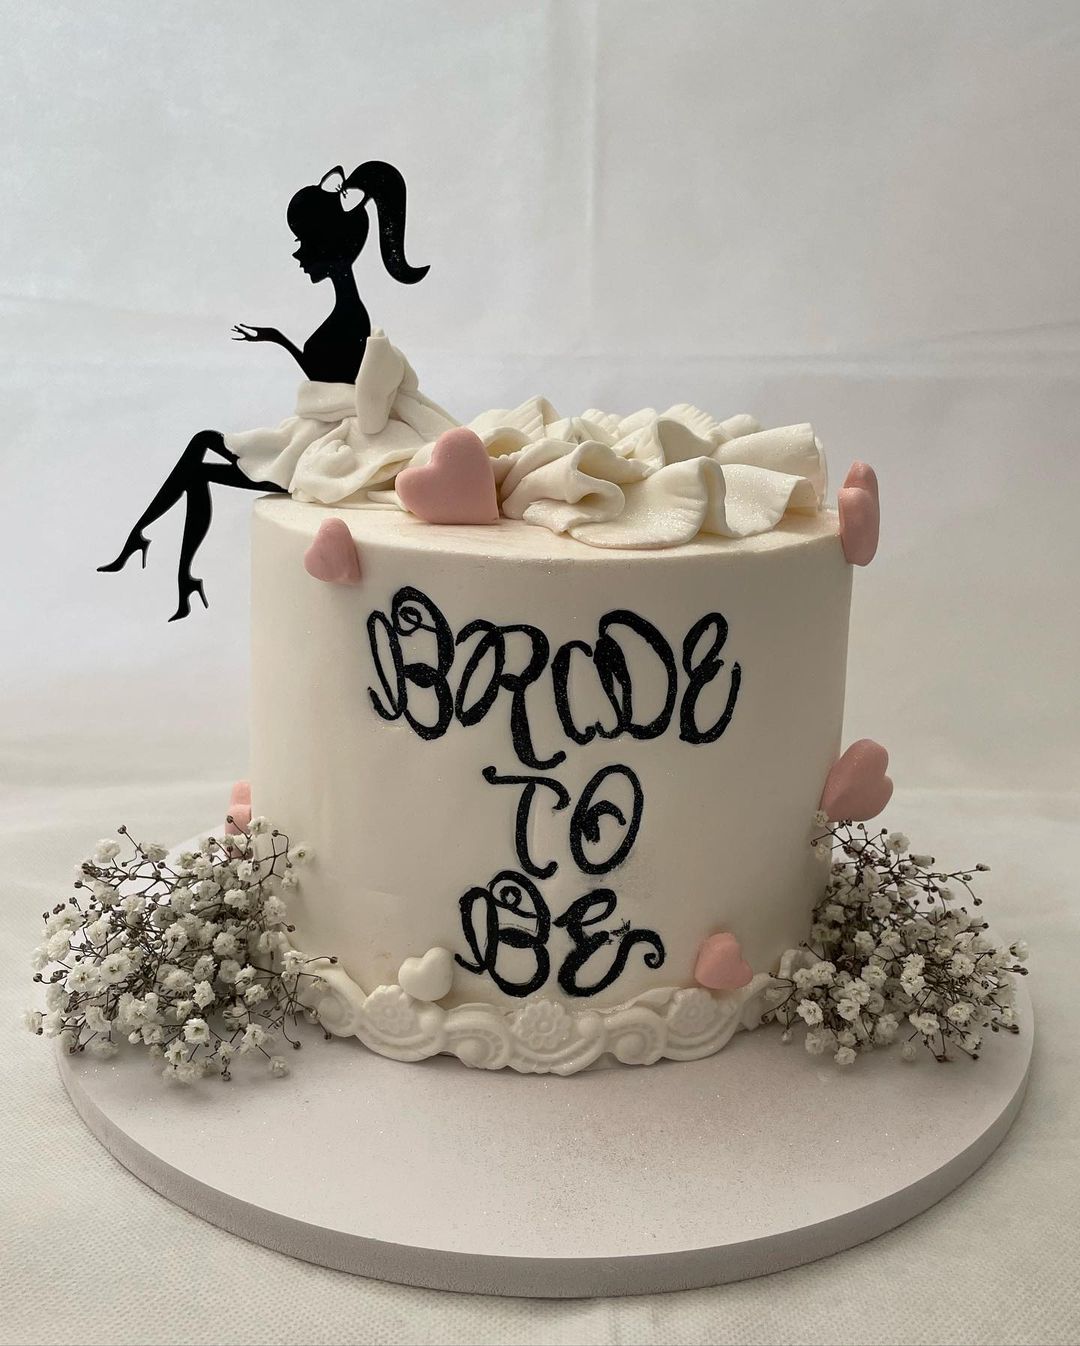 Bachelorette Party Cake Ideas For The Bride-to-Be | Bridal Shower 101